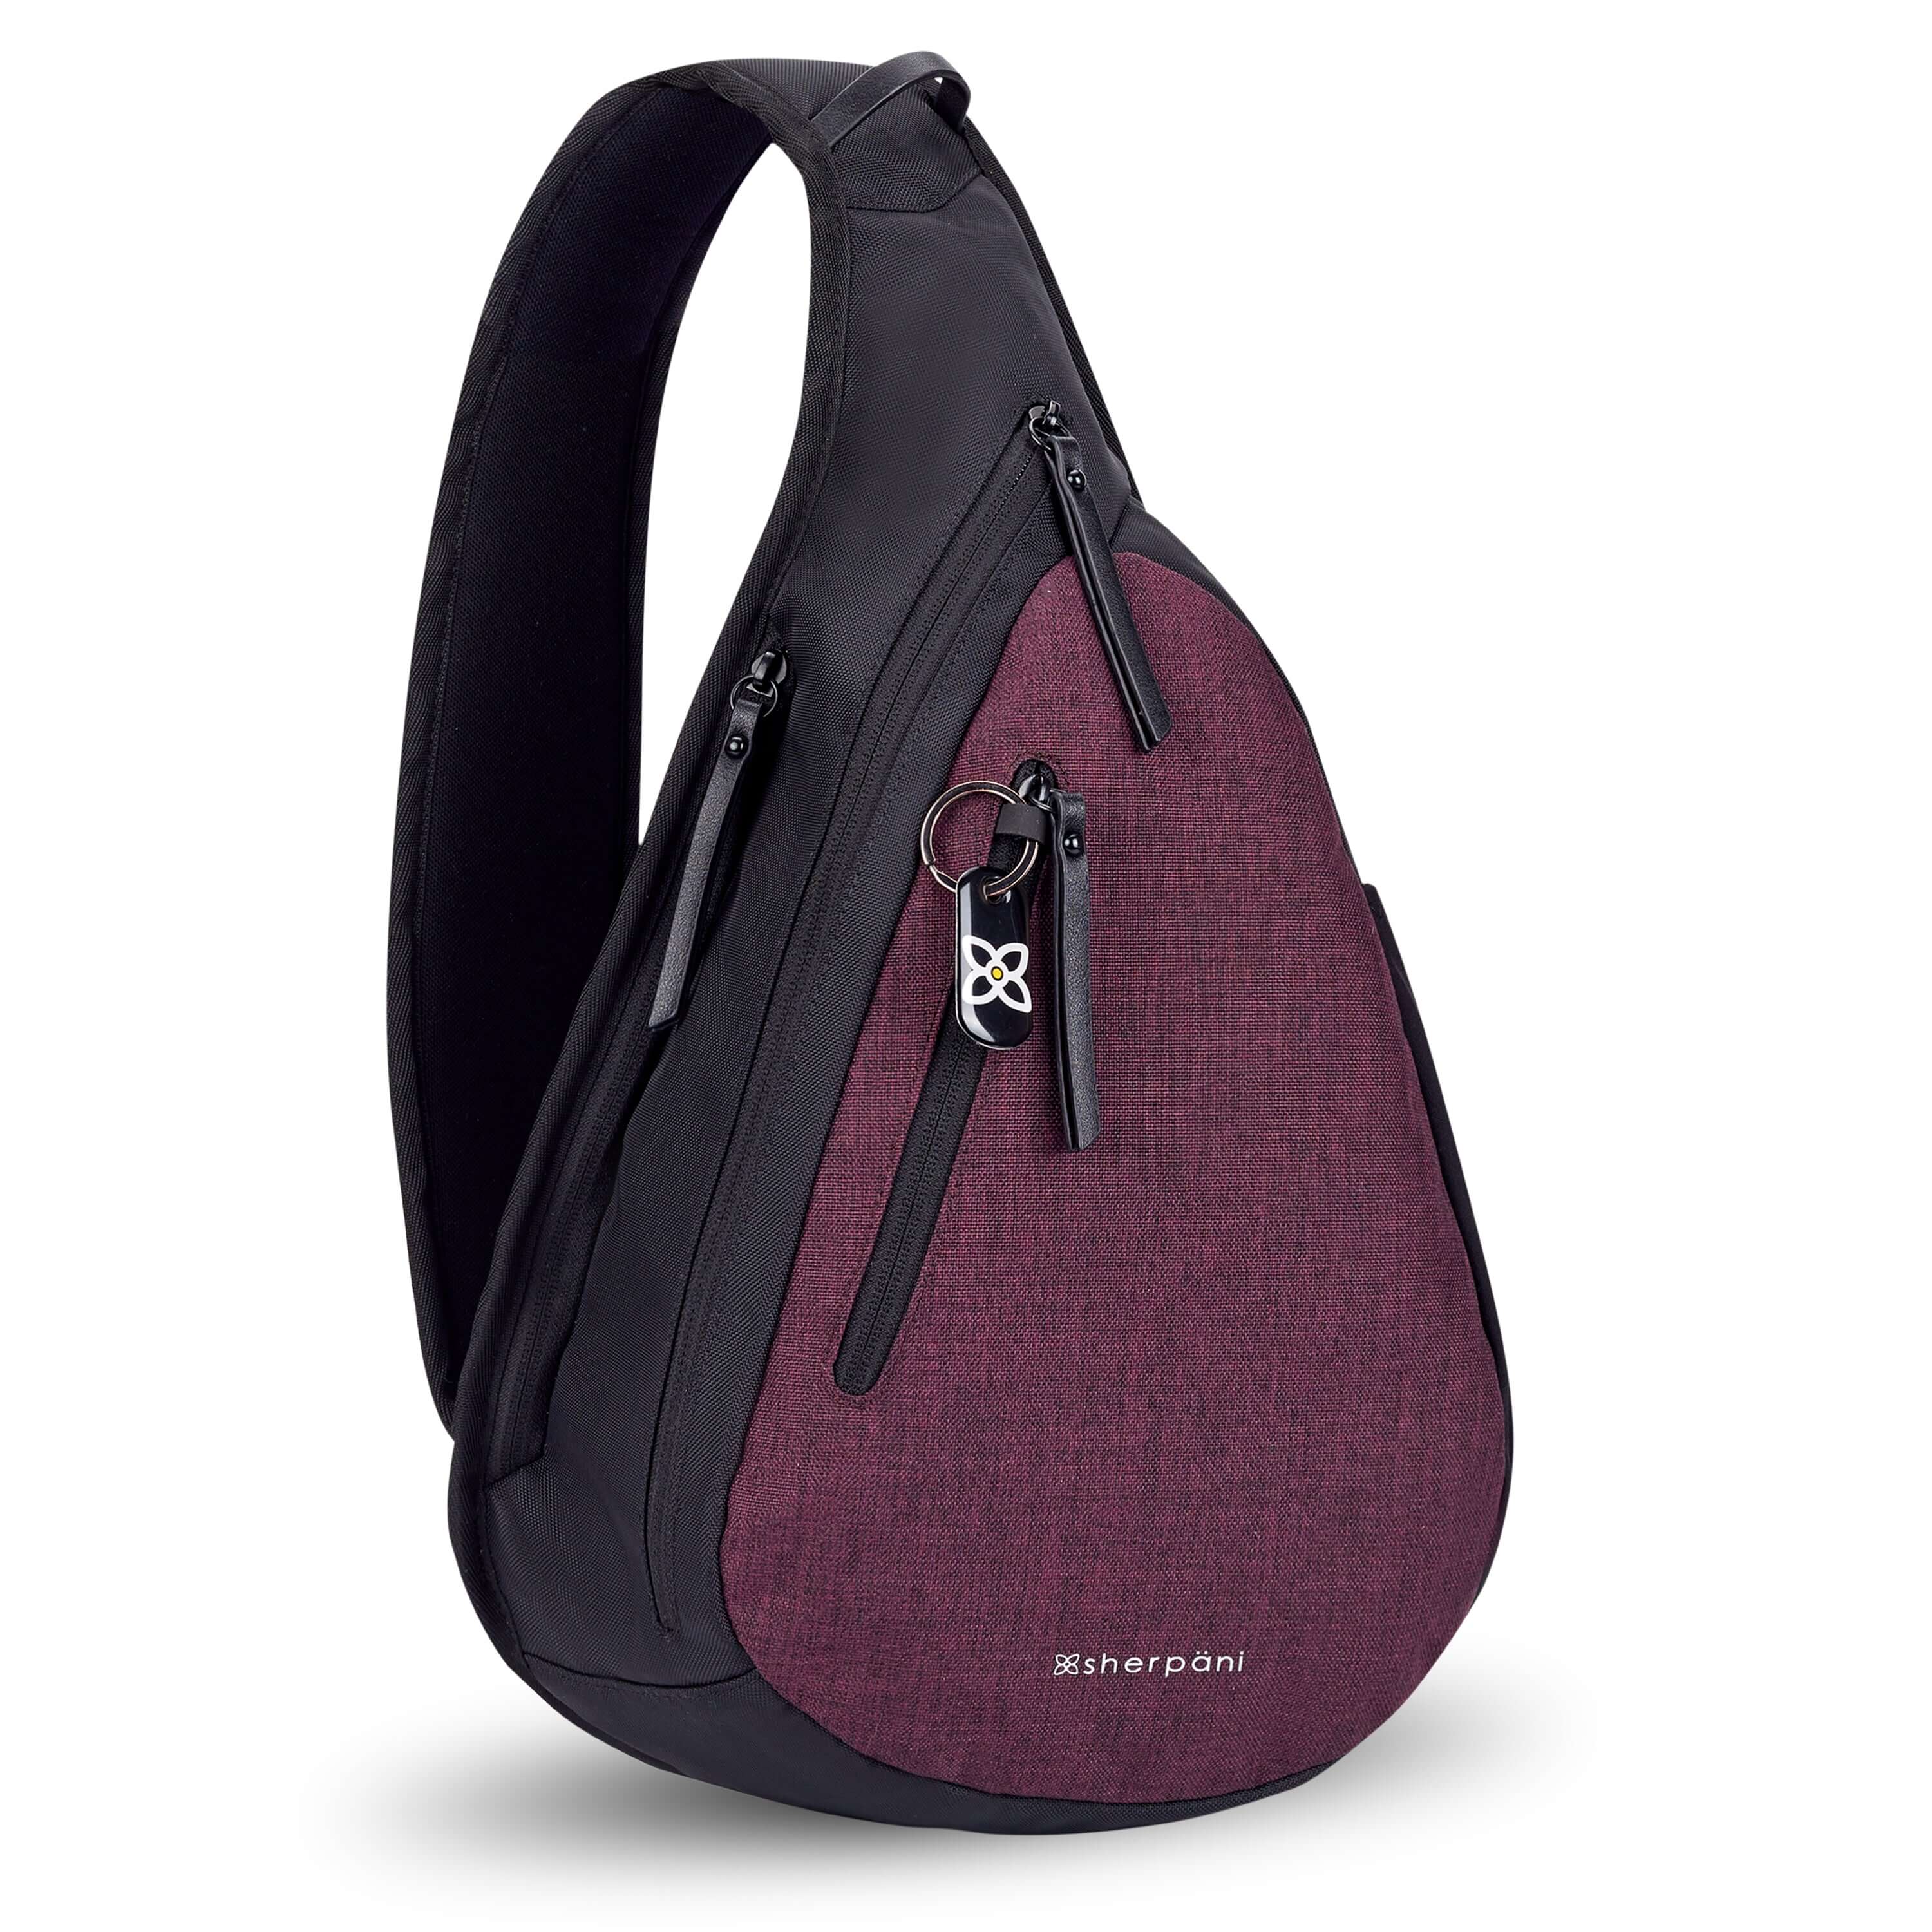 Angled front view of Sherpani's Anti-Theft bag, the Esprit AT in Merlot, with vegan leather accents in black. There is a locking zipper compartment on the front, and two more zipper compartments on the side. An elastic water bottle holder sits on the other side of the bag. #color_merlot